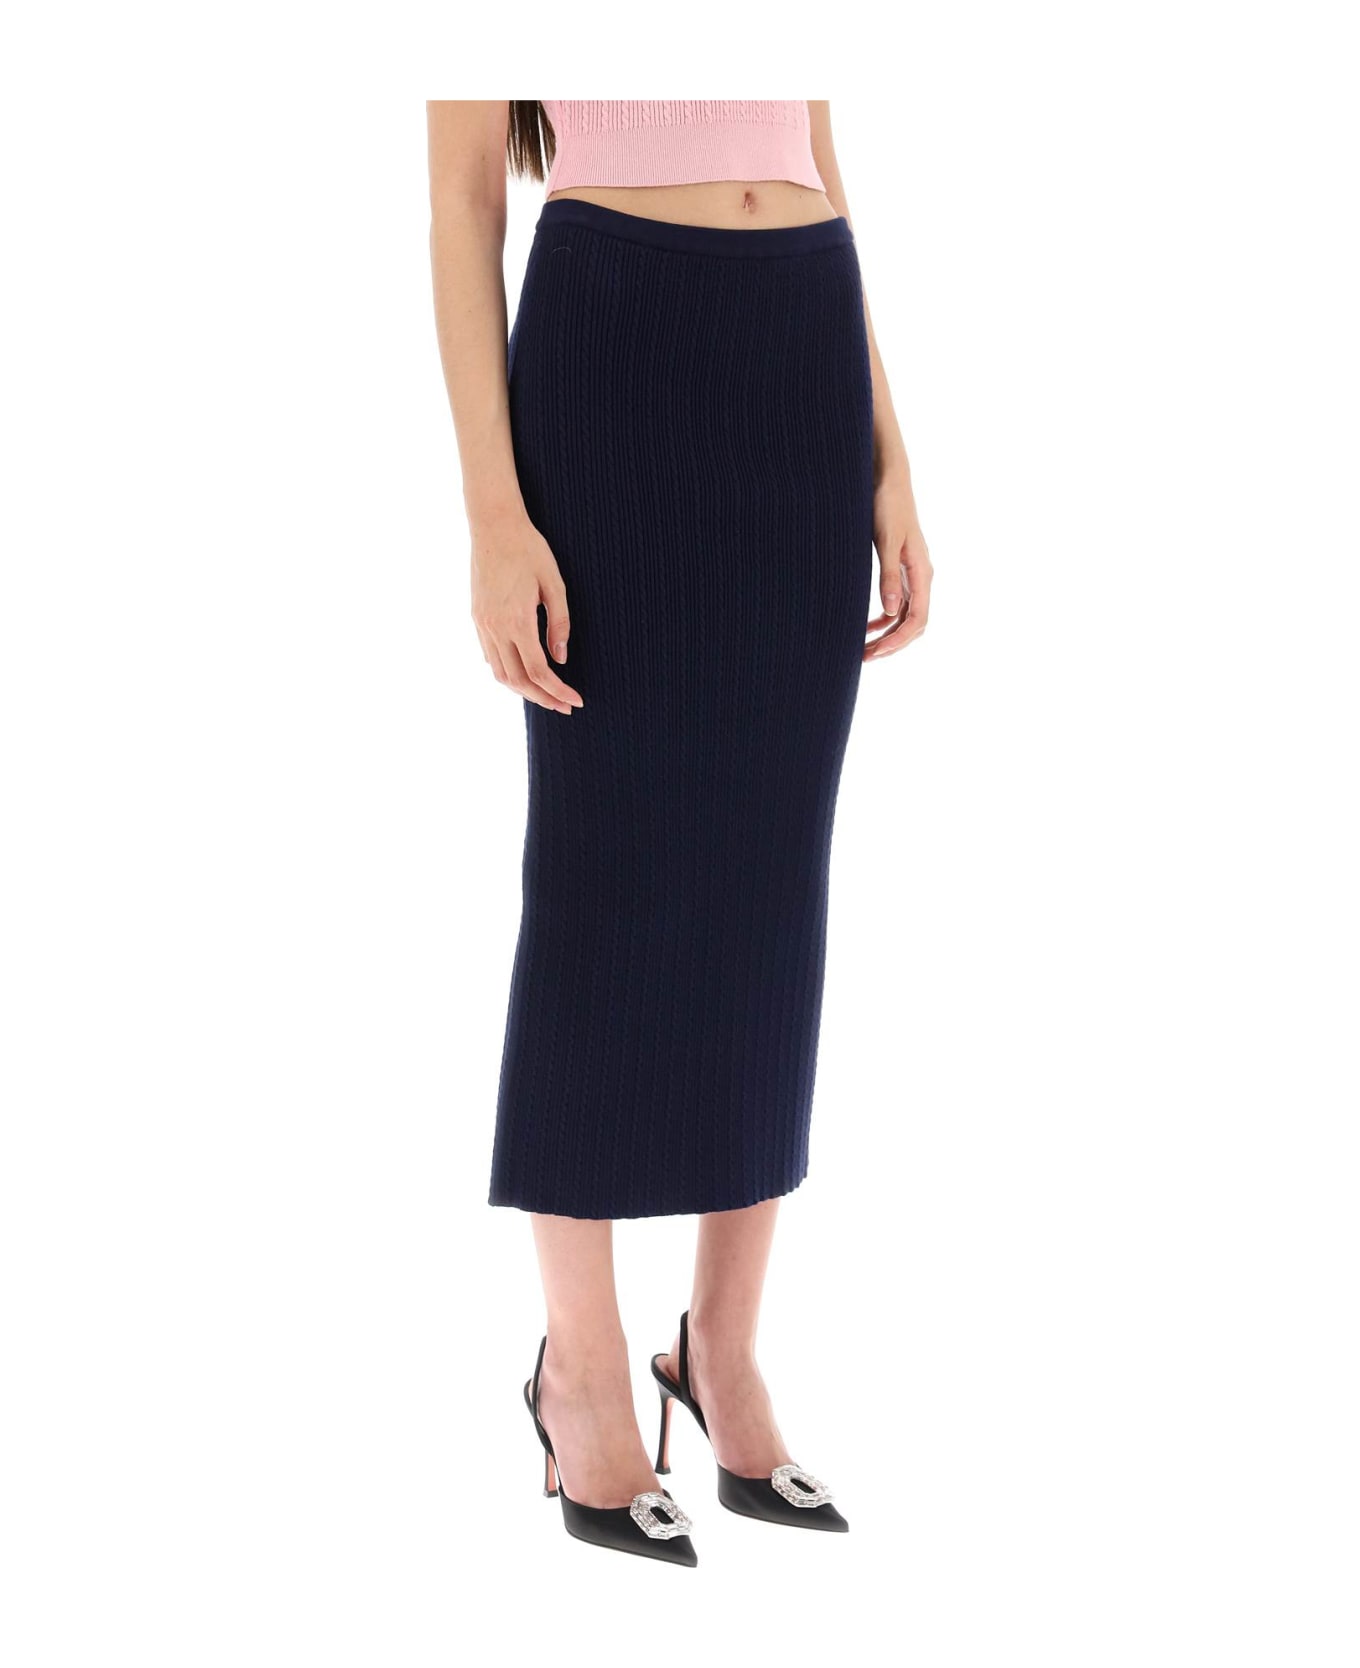 Alessandra Rich Knitted Pencil Skirt - Blue